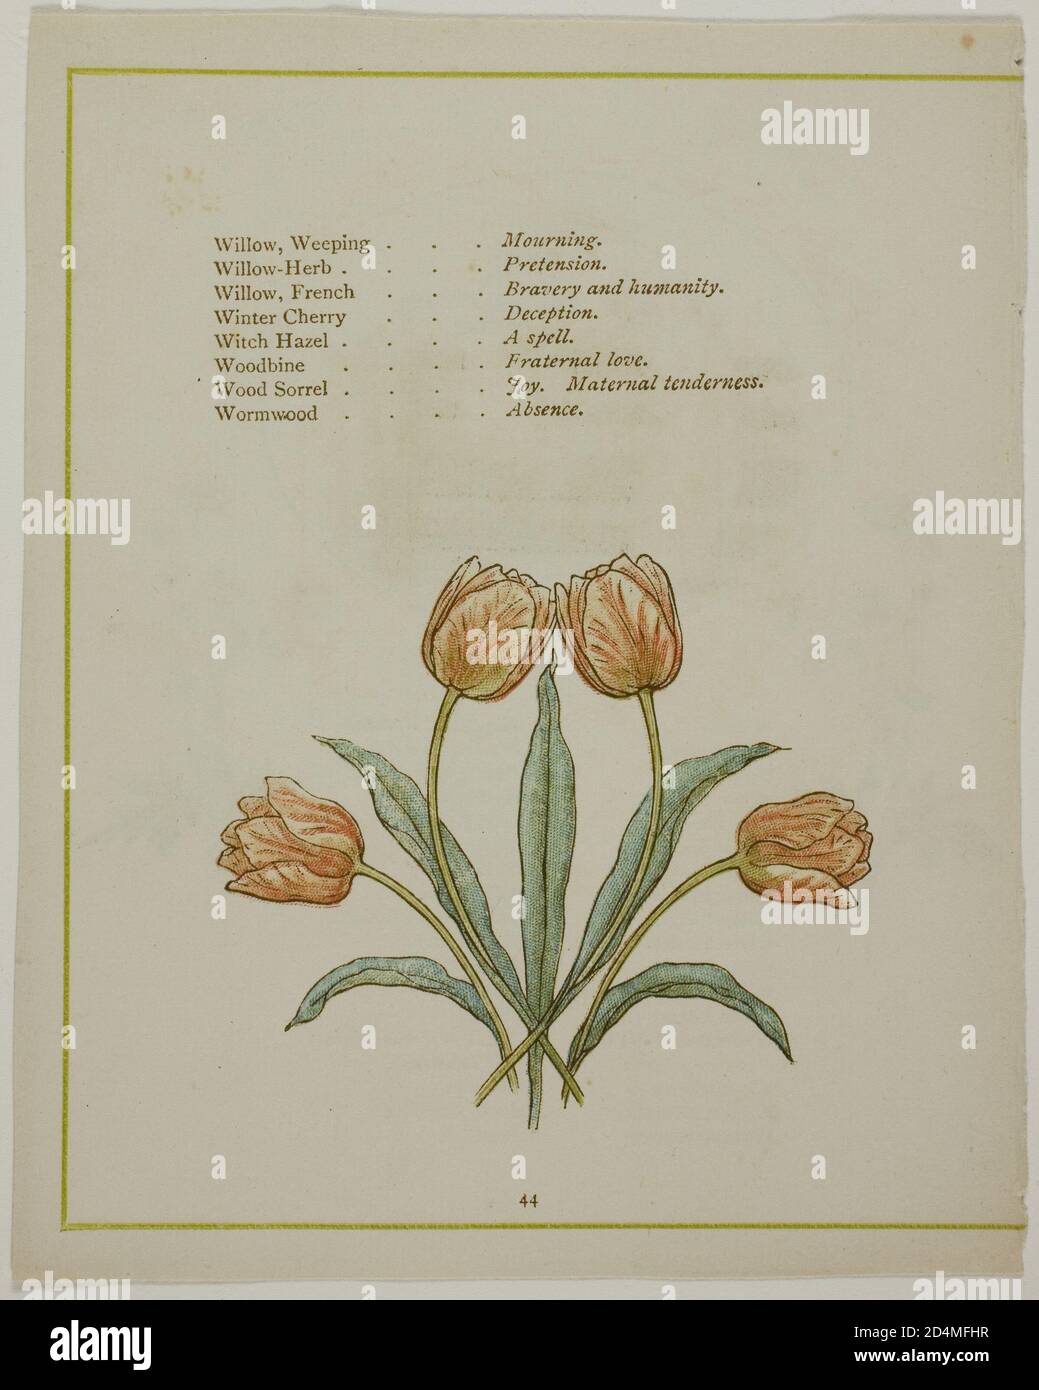 19th Century Art -  Decorative Illustration; from The Illuminated Language of Flowers ;  Date:  Published 1884; probably Edmund Evans (English; 1826-1905); after Kate Greenaway (English; 1846-1901)printed by Edmund Evans Stock Photo